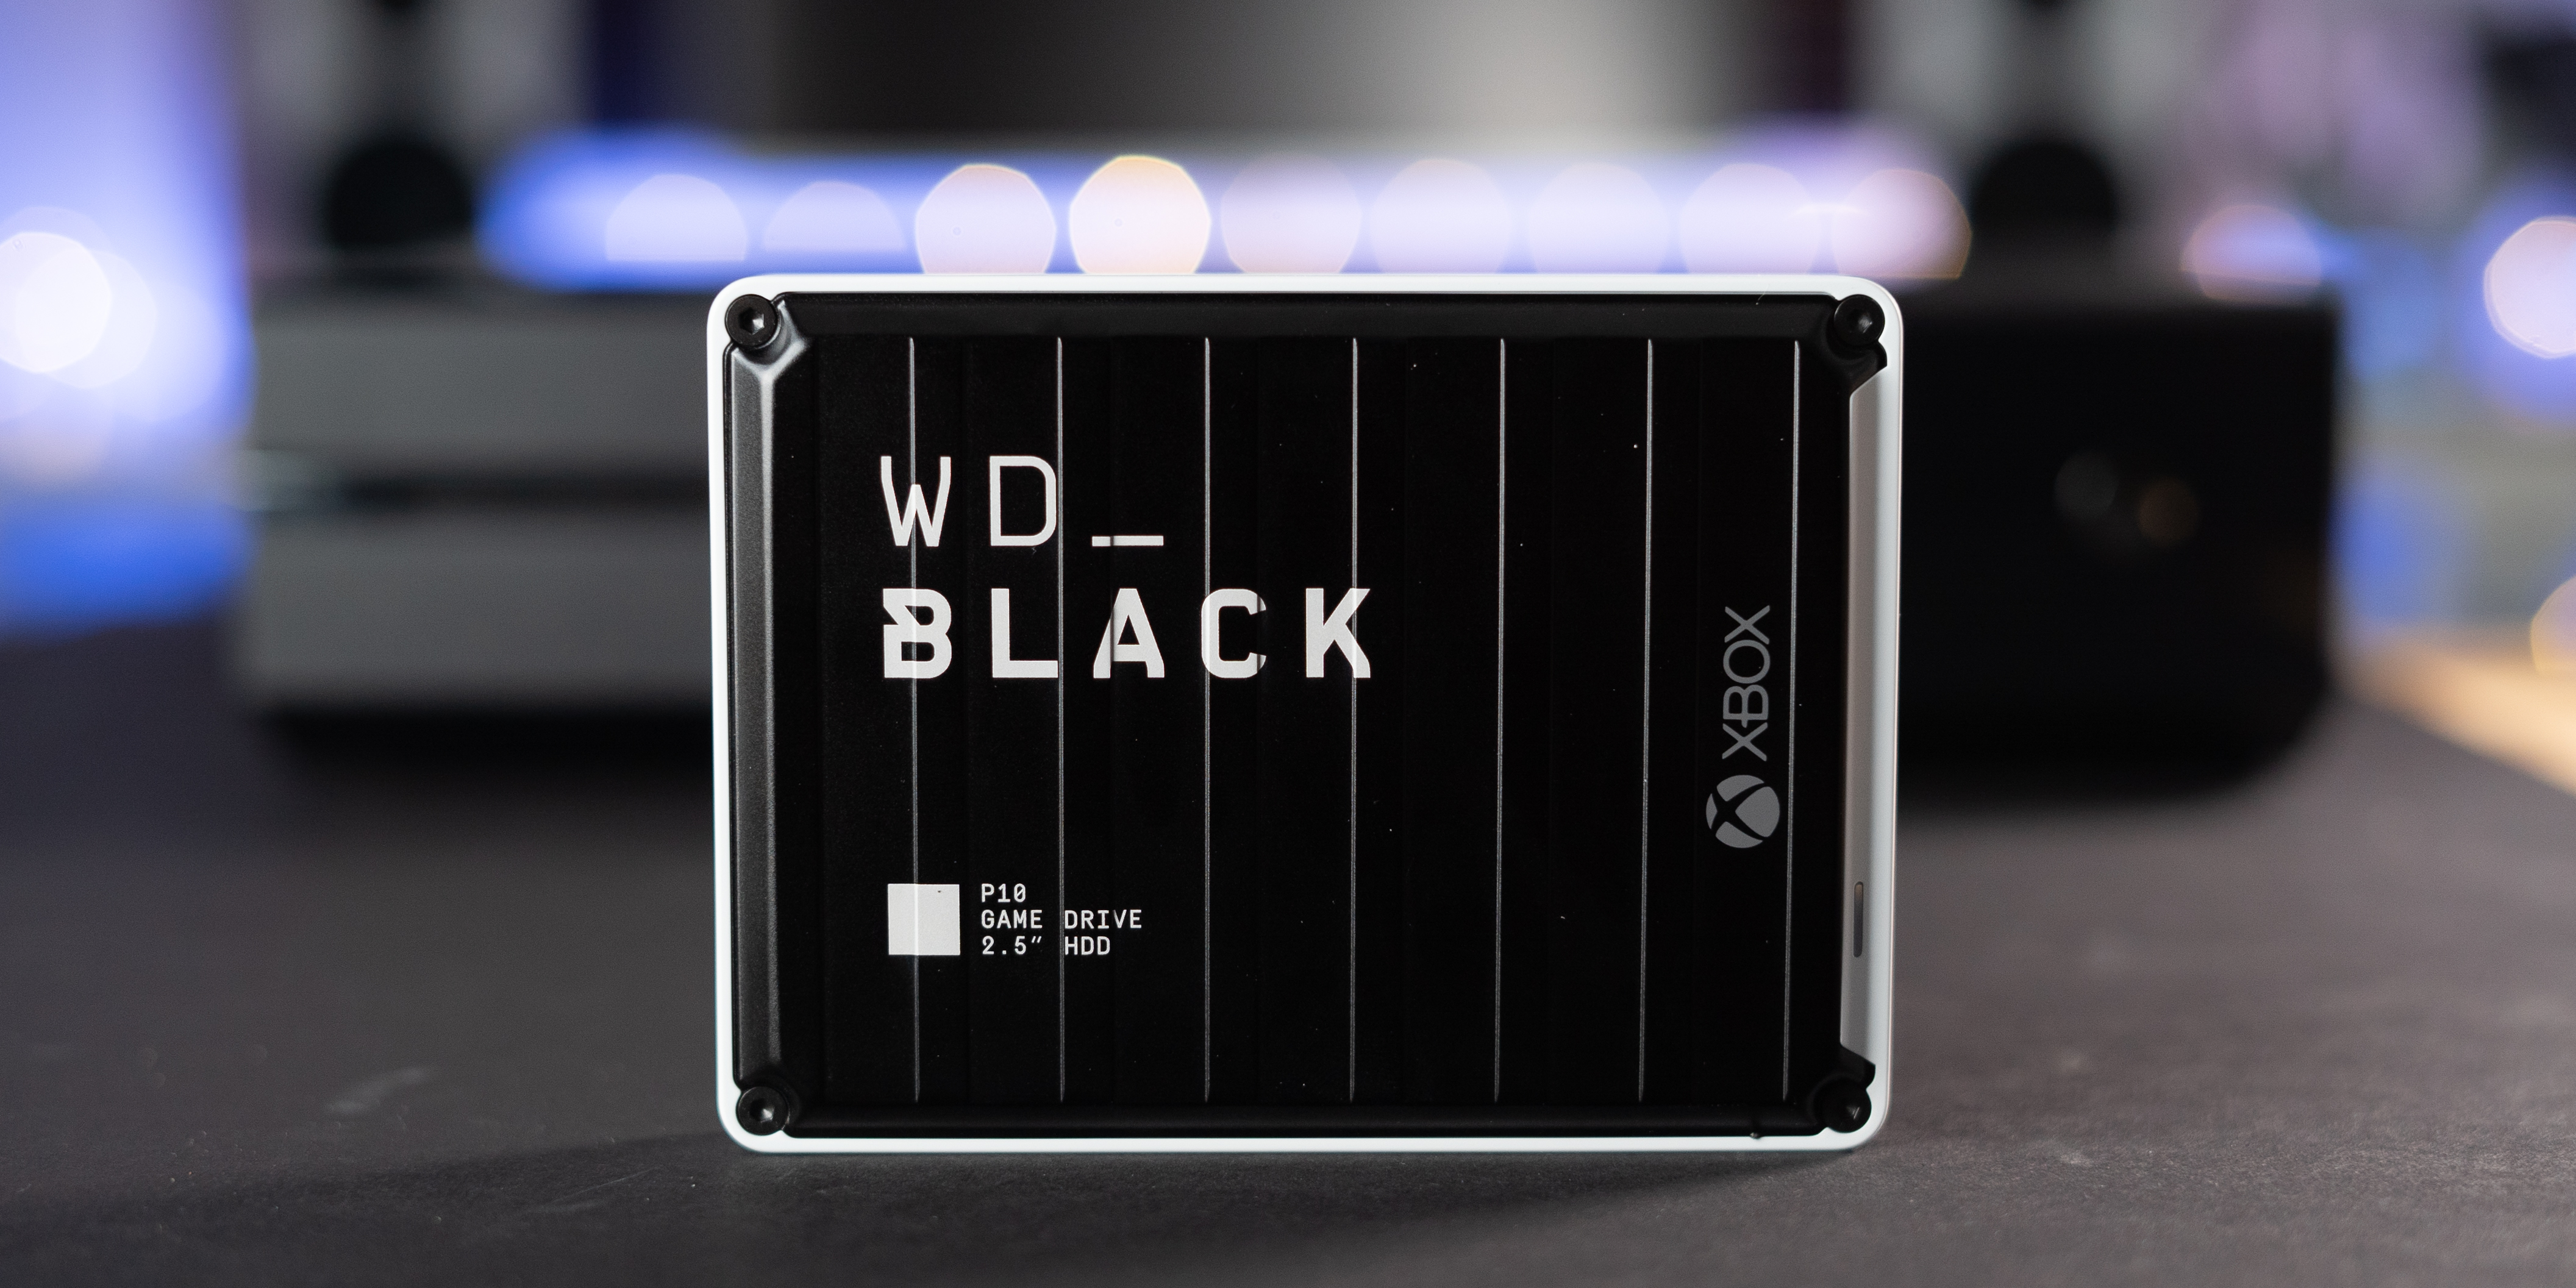 Add Wd S Black P10 3tb Hard Drive To Your Xbox One At 90 Save 9to5toys